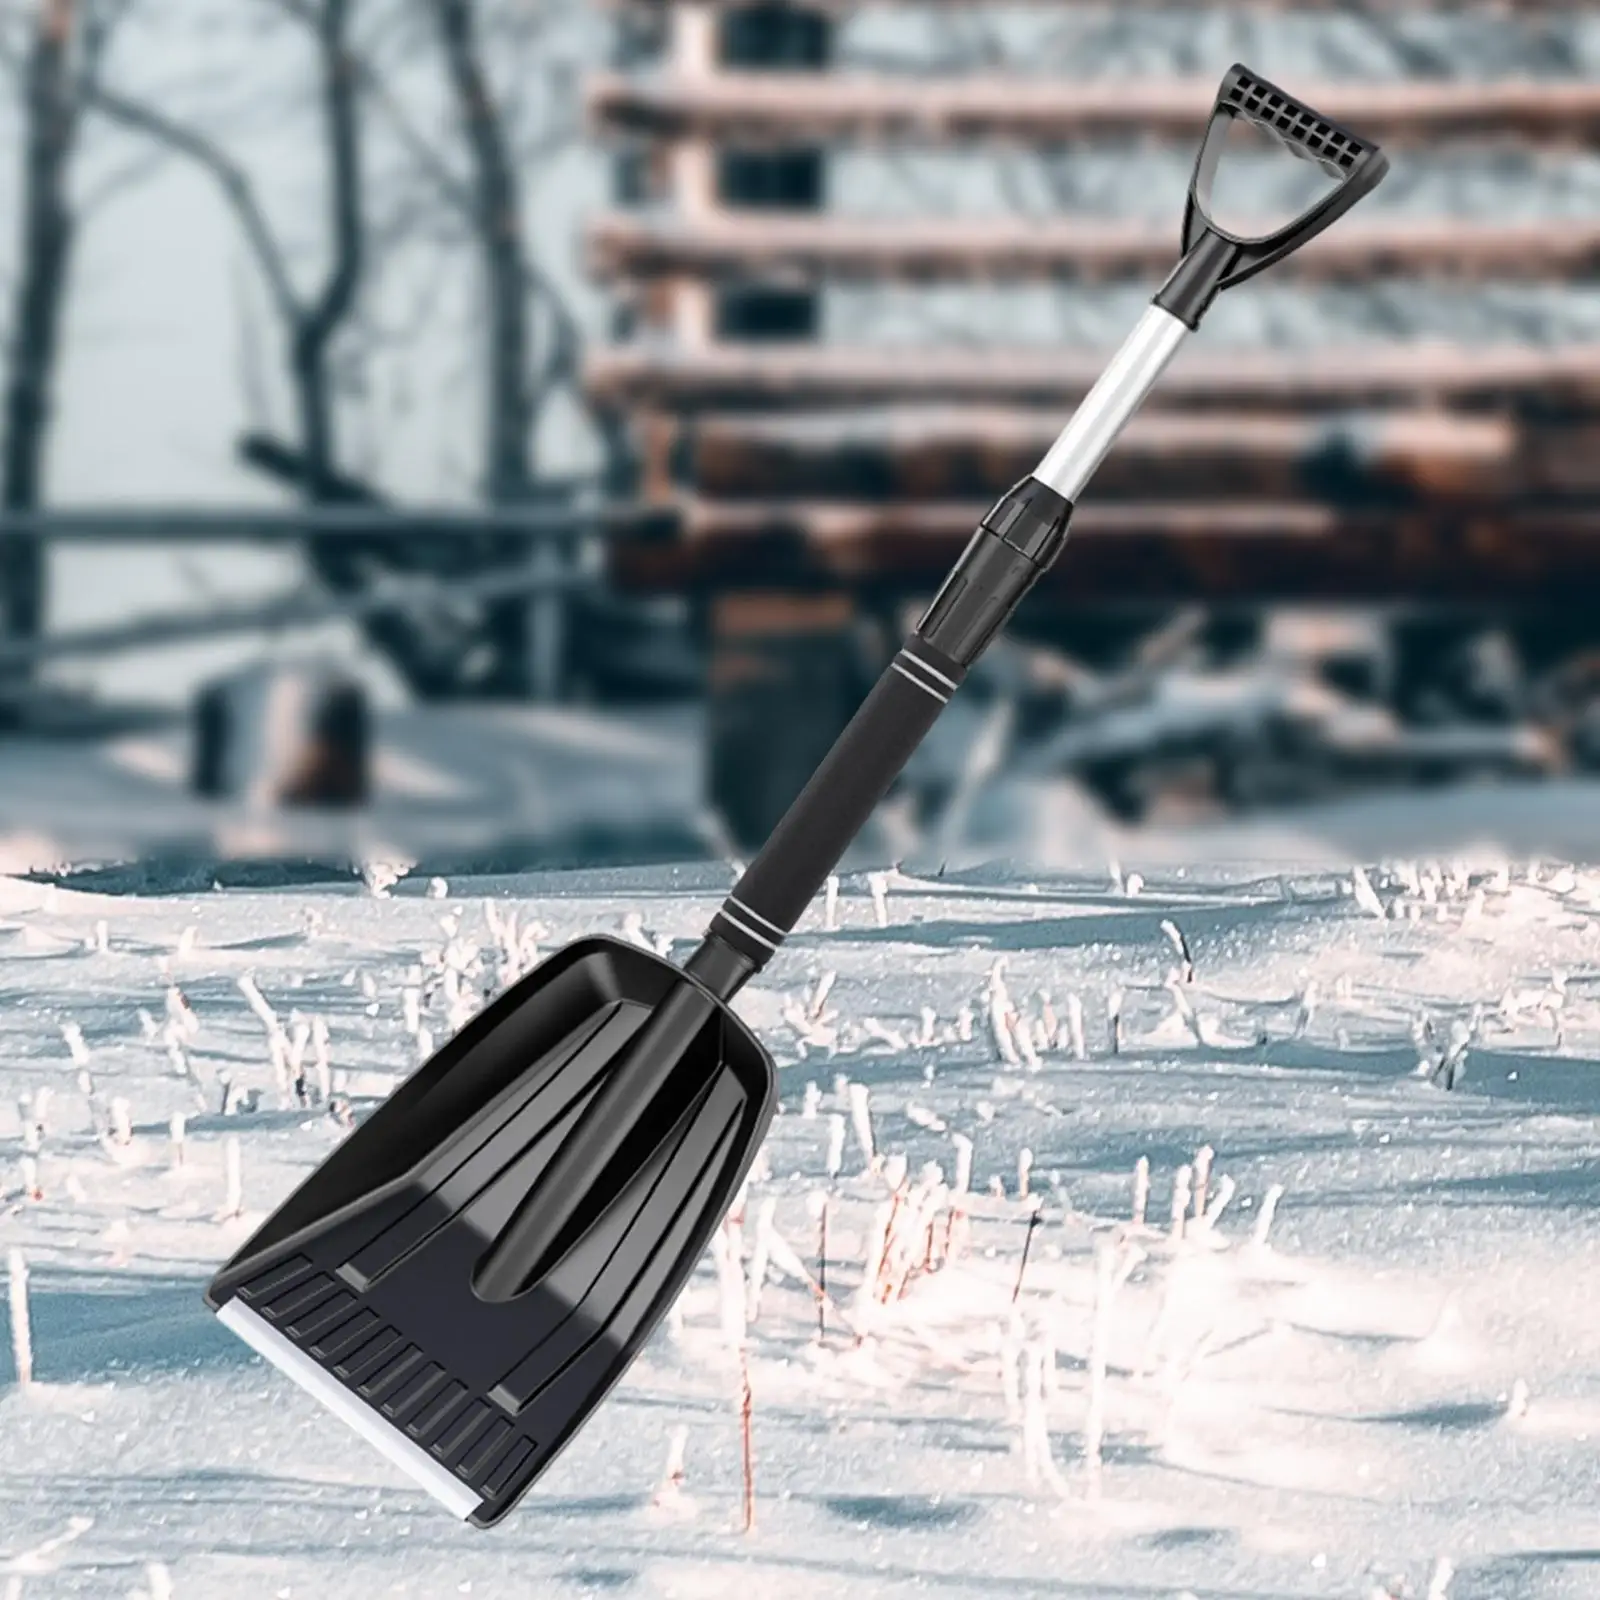 Snow Shovel Lightweight Window Cleaning with Foam Handle Portable Retractable Snow Shovel for Car Suvs Garden Beach Camping